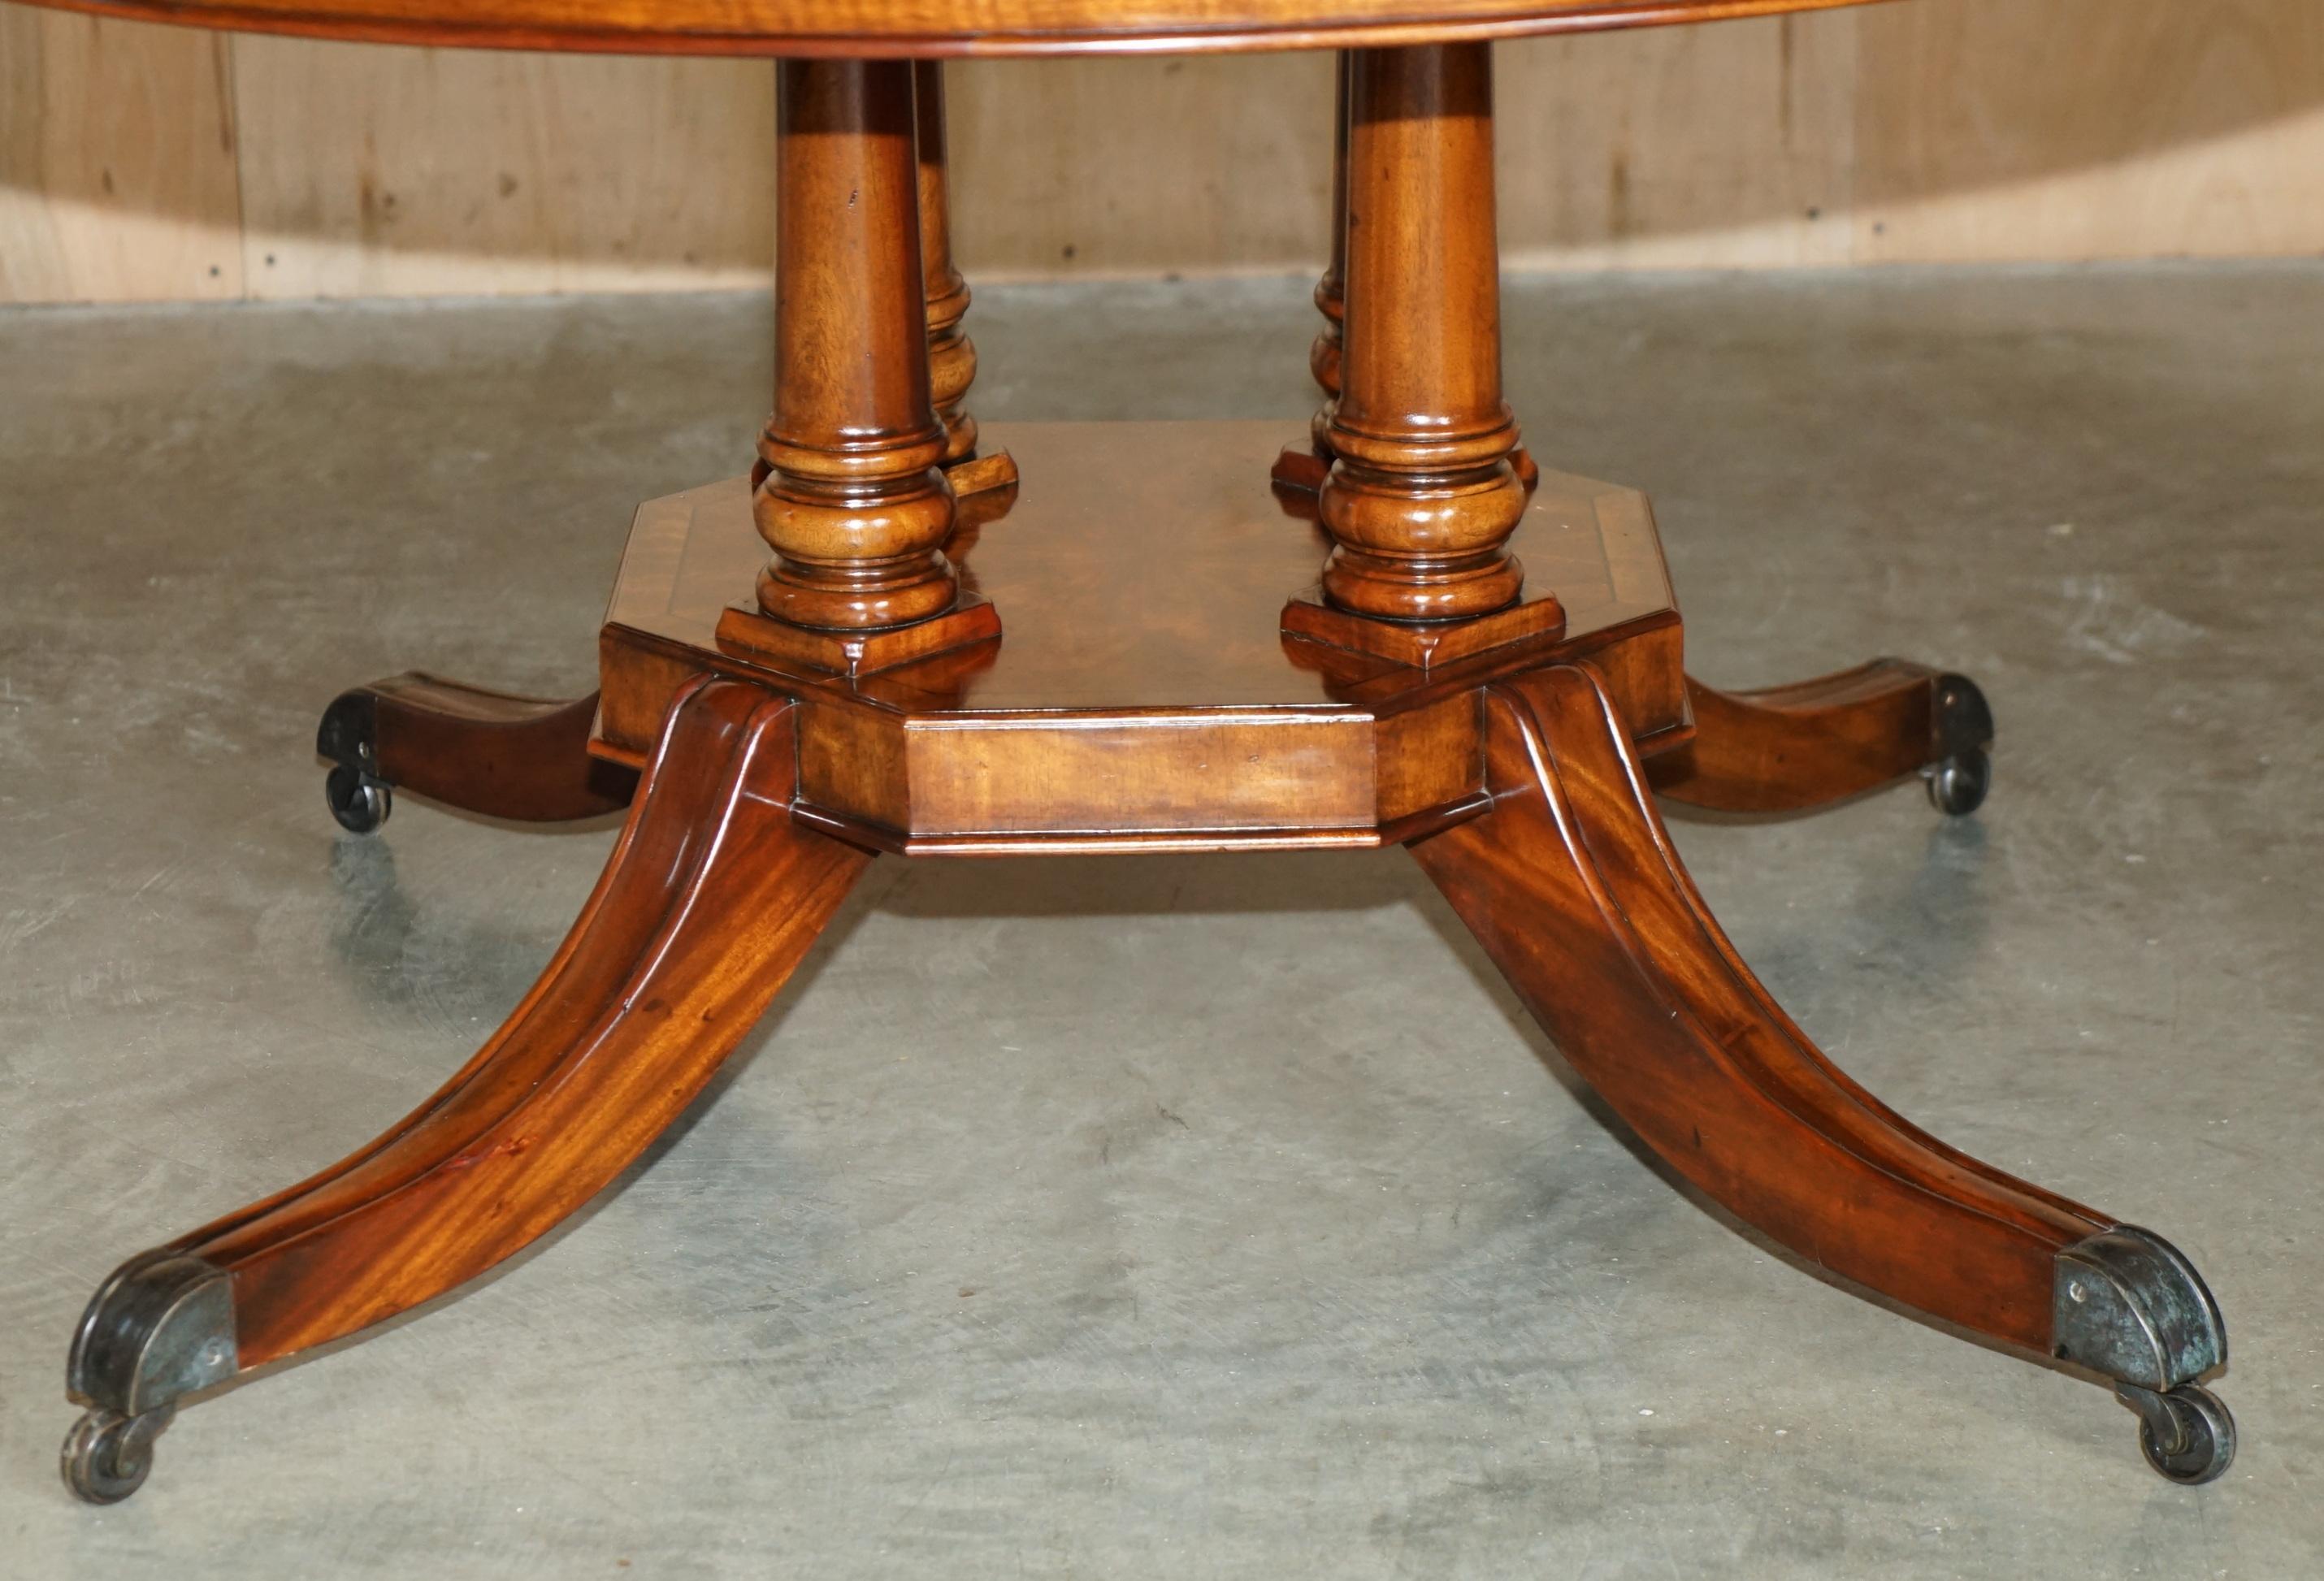  DESIGNER THEODORE ALEXANDER WALNUT EXTENDING ROUND JUPE DiNING TABLE For Sale 1